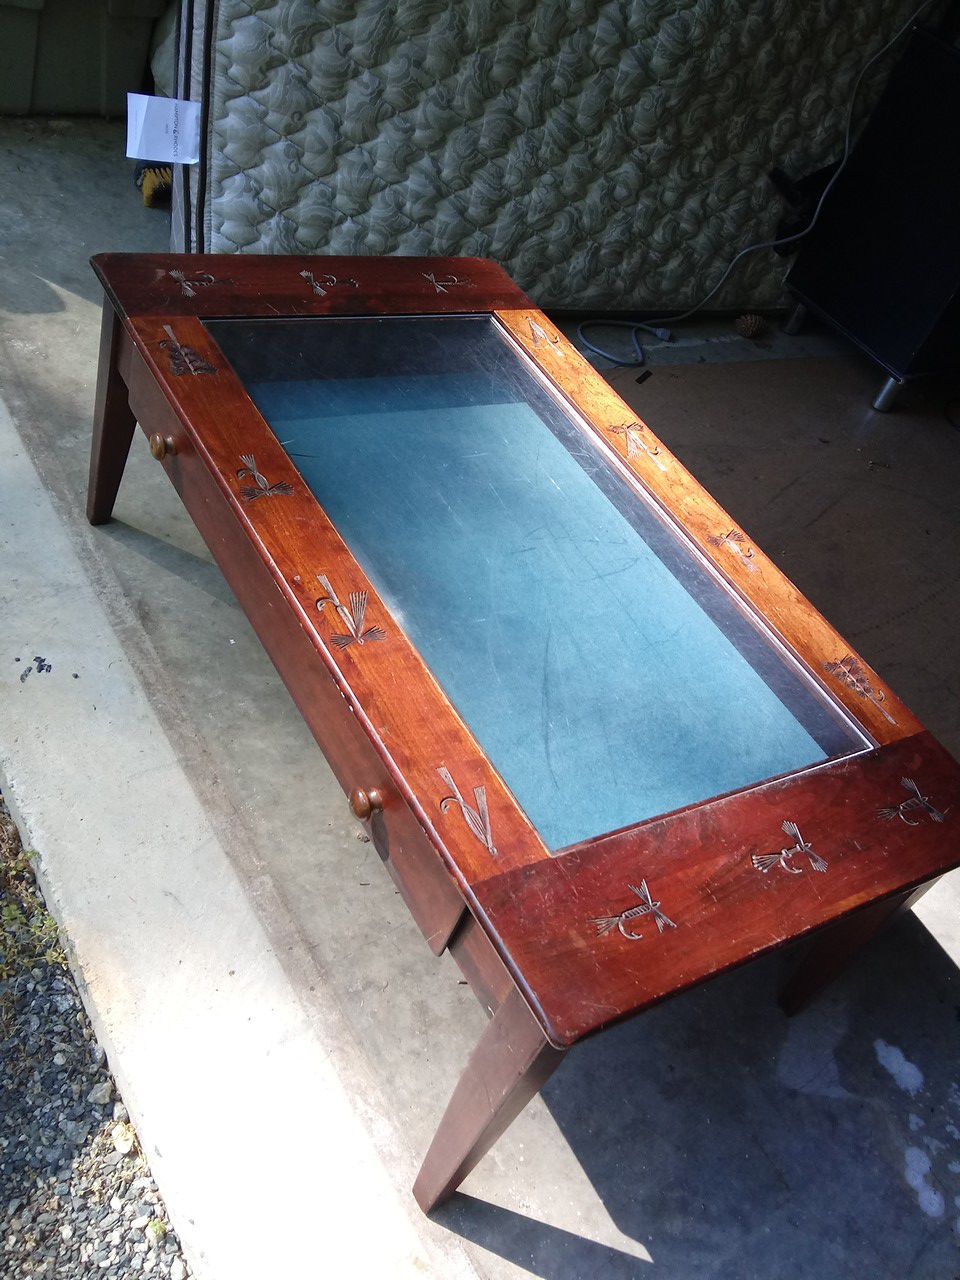 Coffee table solid wood with shadow box top had fishing lures carved around edges b great at lake house